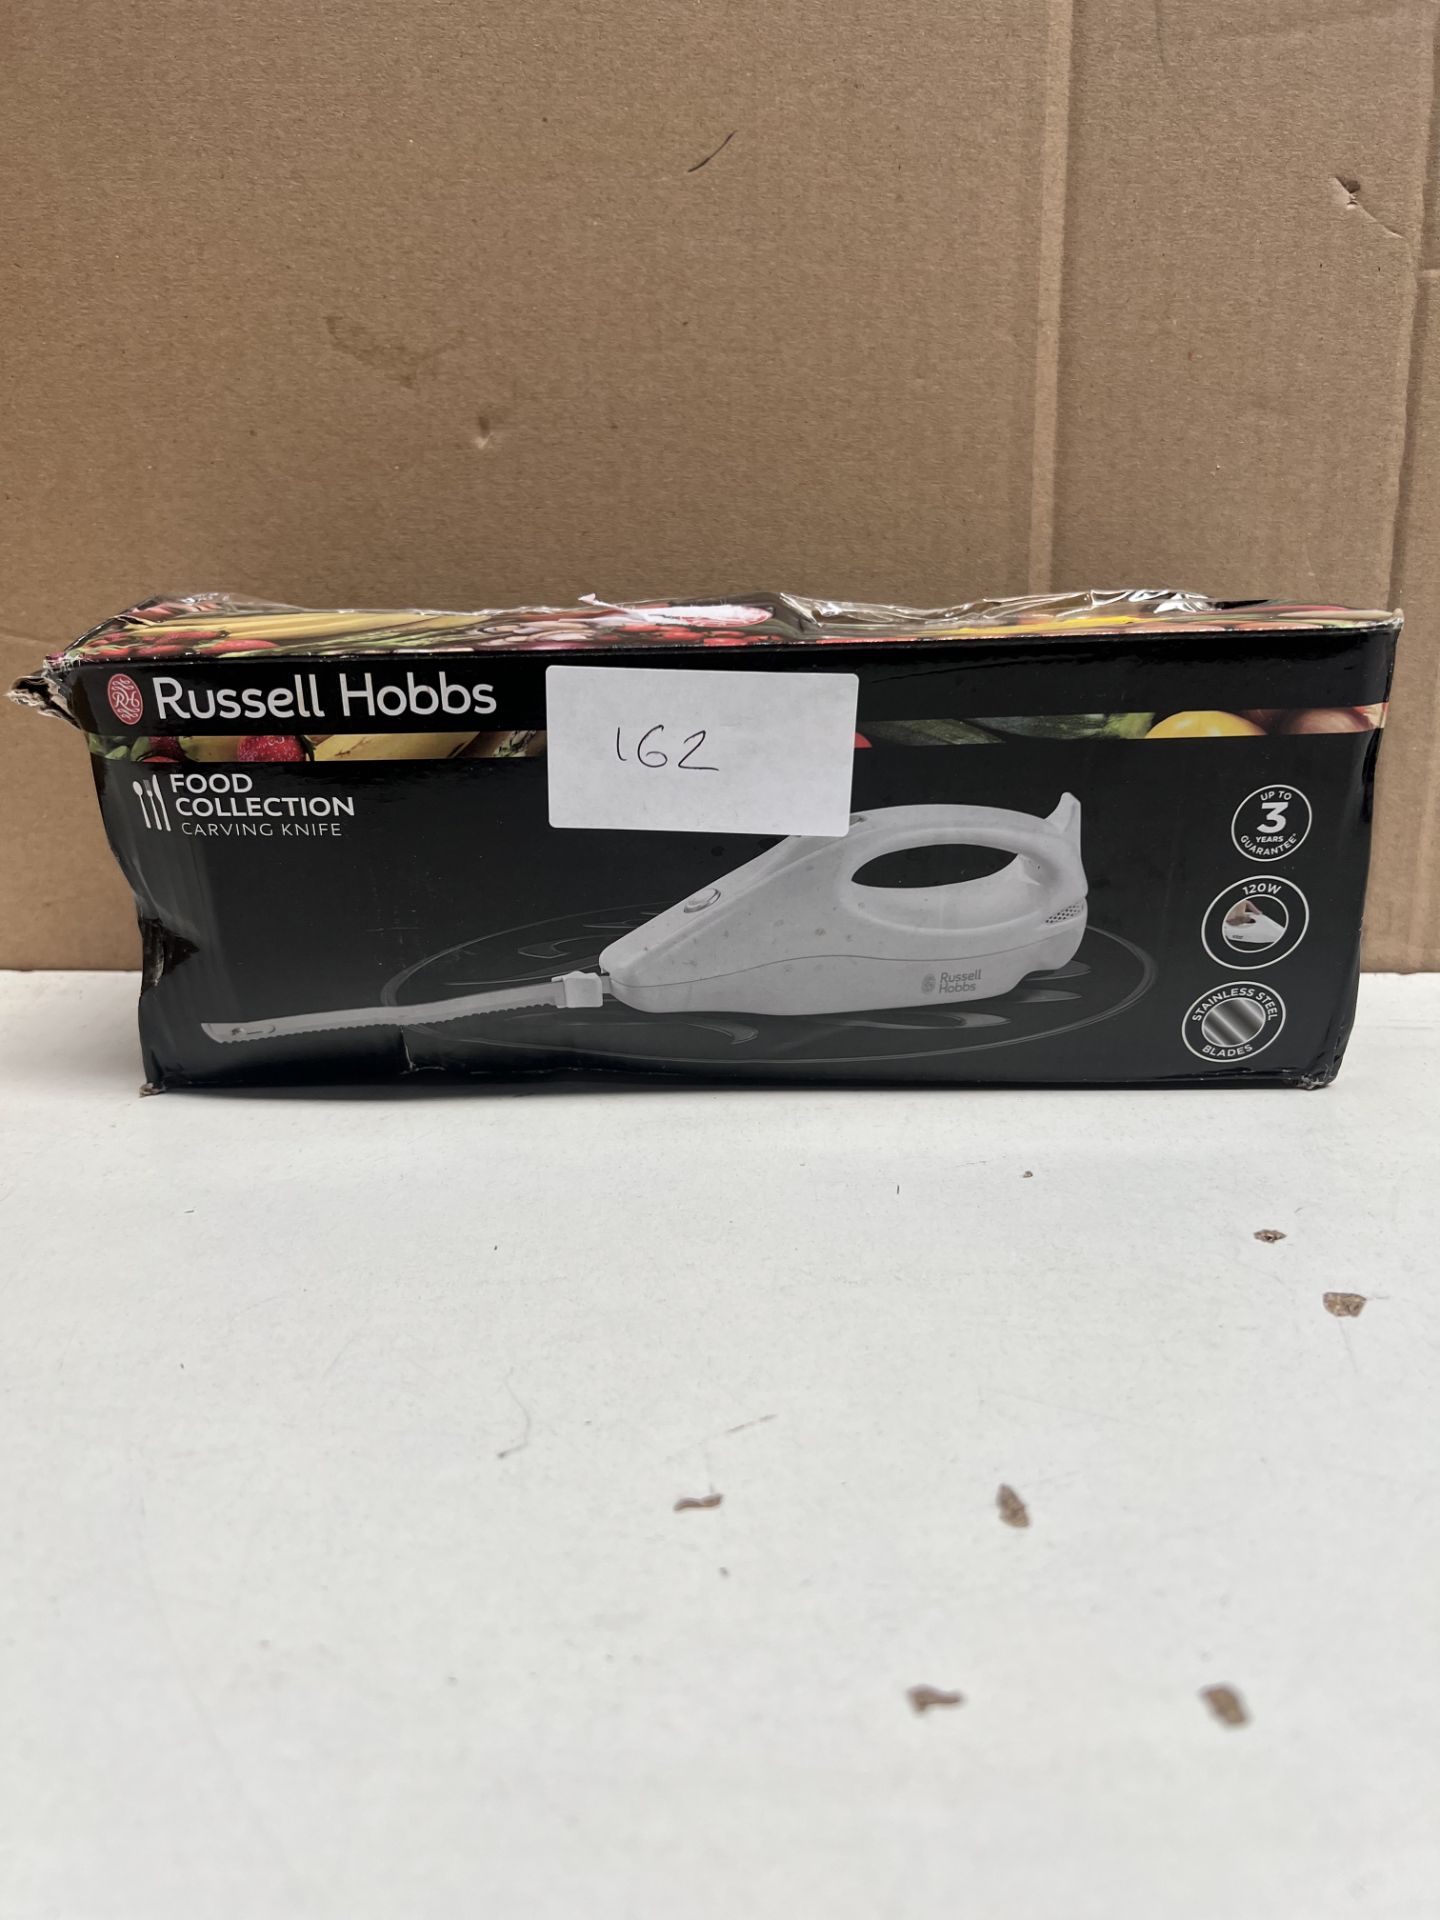 Russell Hobbs Food Collection Carving Knife. RRP £29.99 - GRADE U